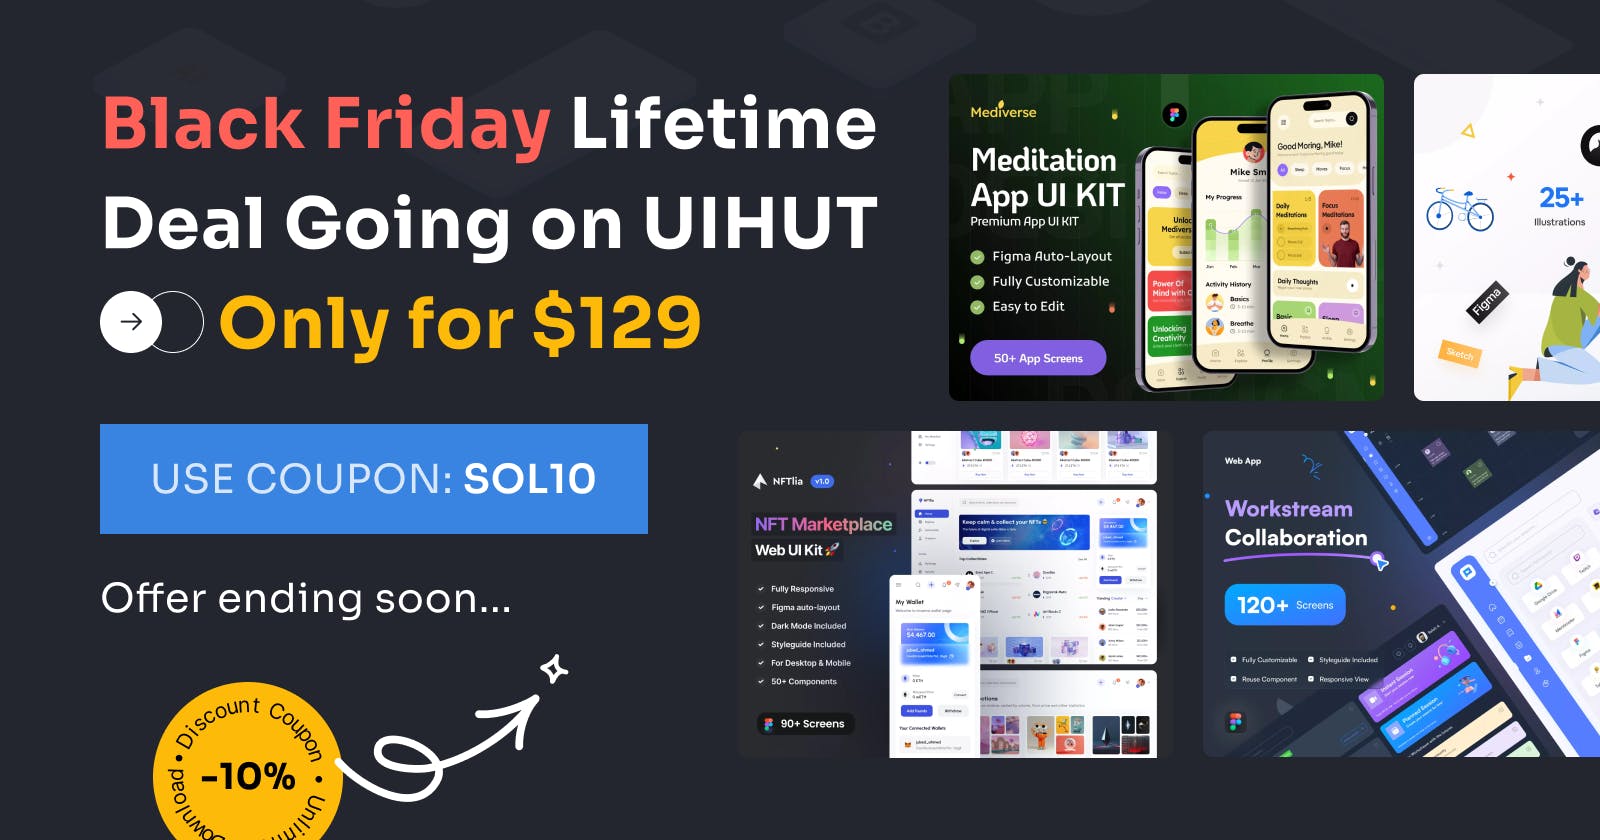 Boost Your Creativity With UIHUT's Exclusive Black Friday Deal!